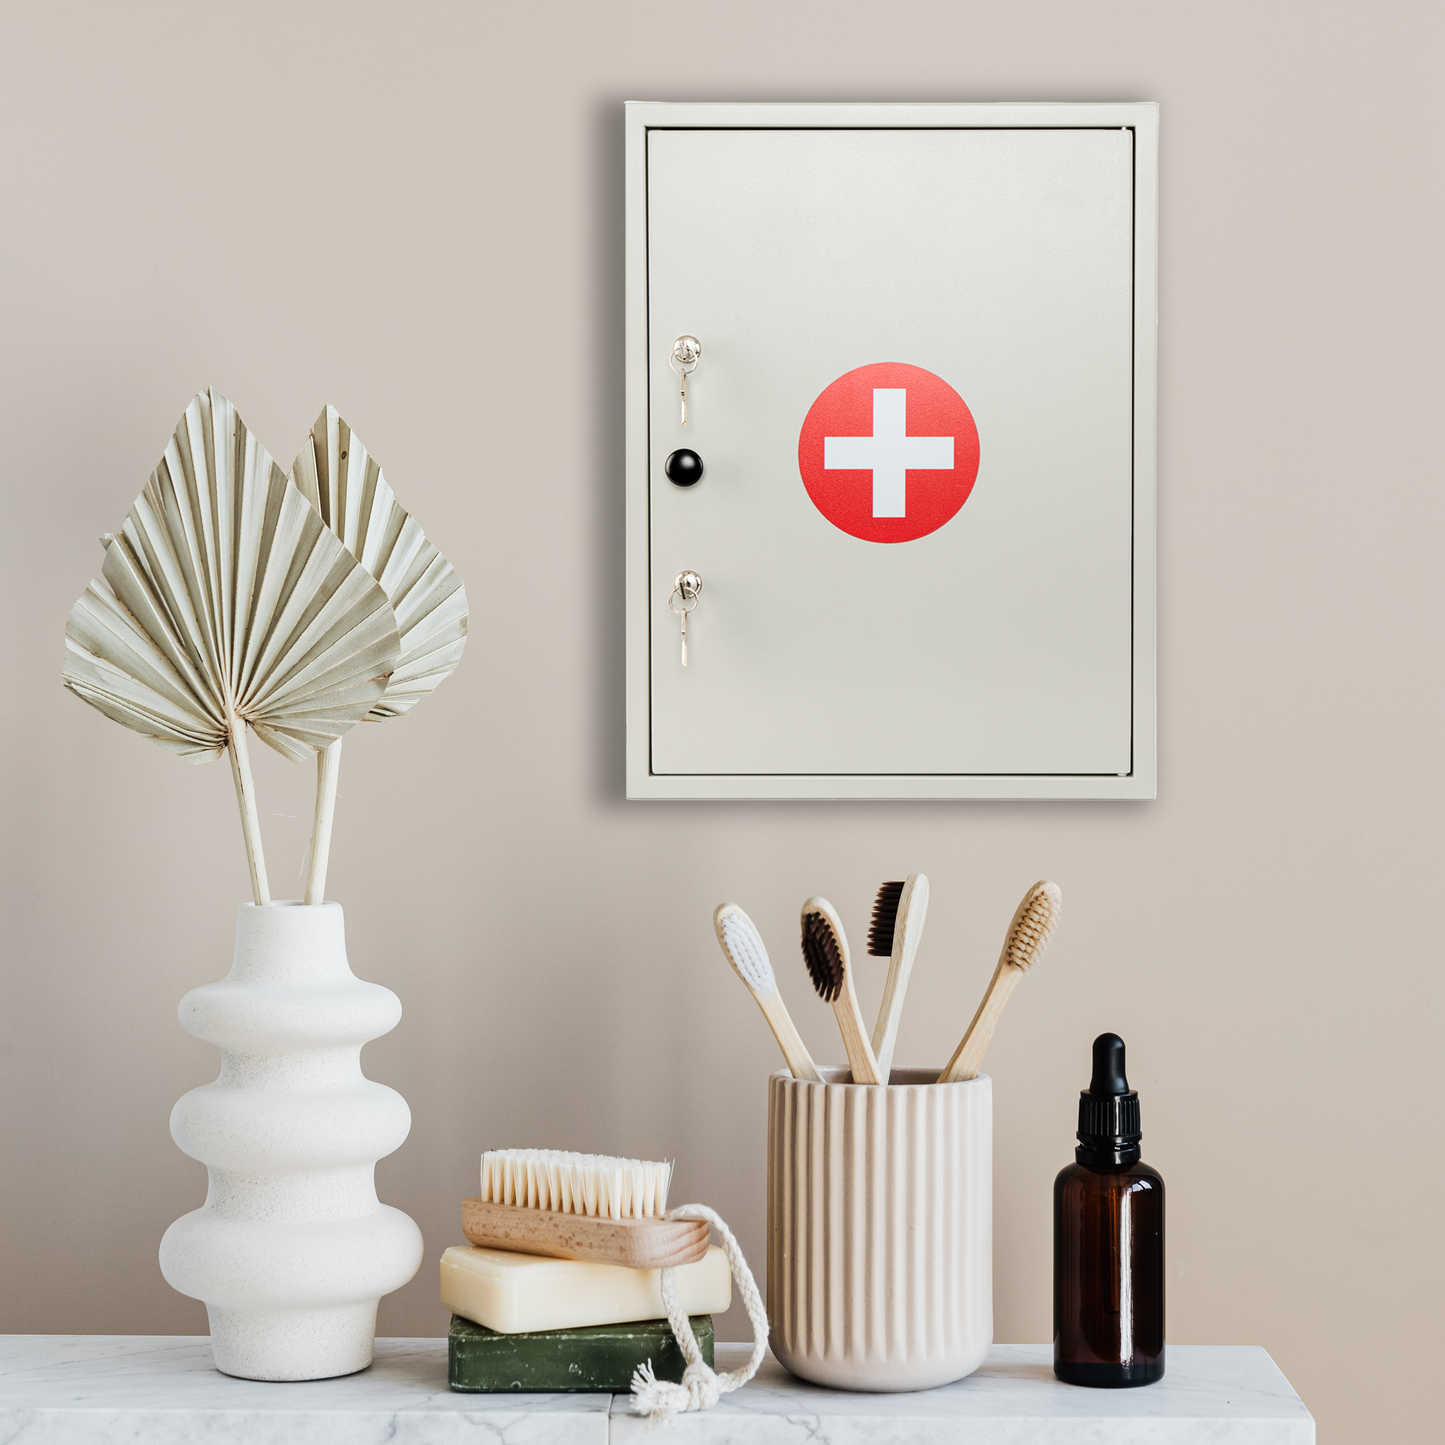 M-MC-6 - Large Dual-Lock Medicine Cabinet – Wall Mounted & Secure Steel Medicine Pills & First Aid Kit & Emeergency Kit Box with Locks for Home Office & School Use (White)